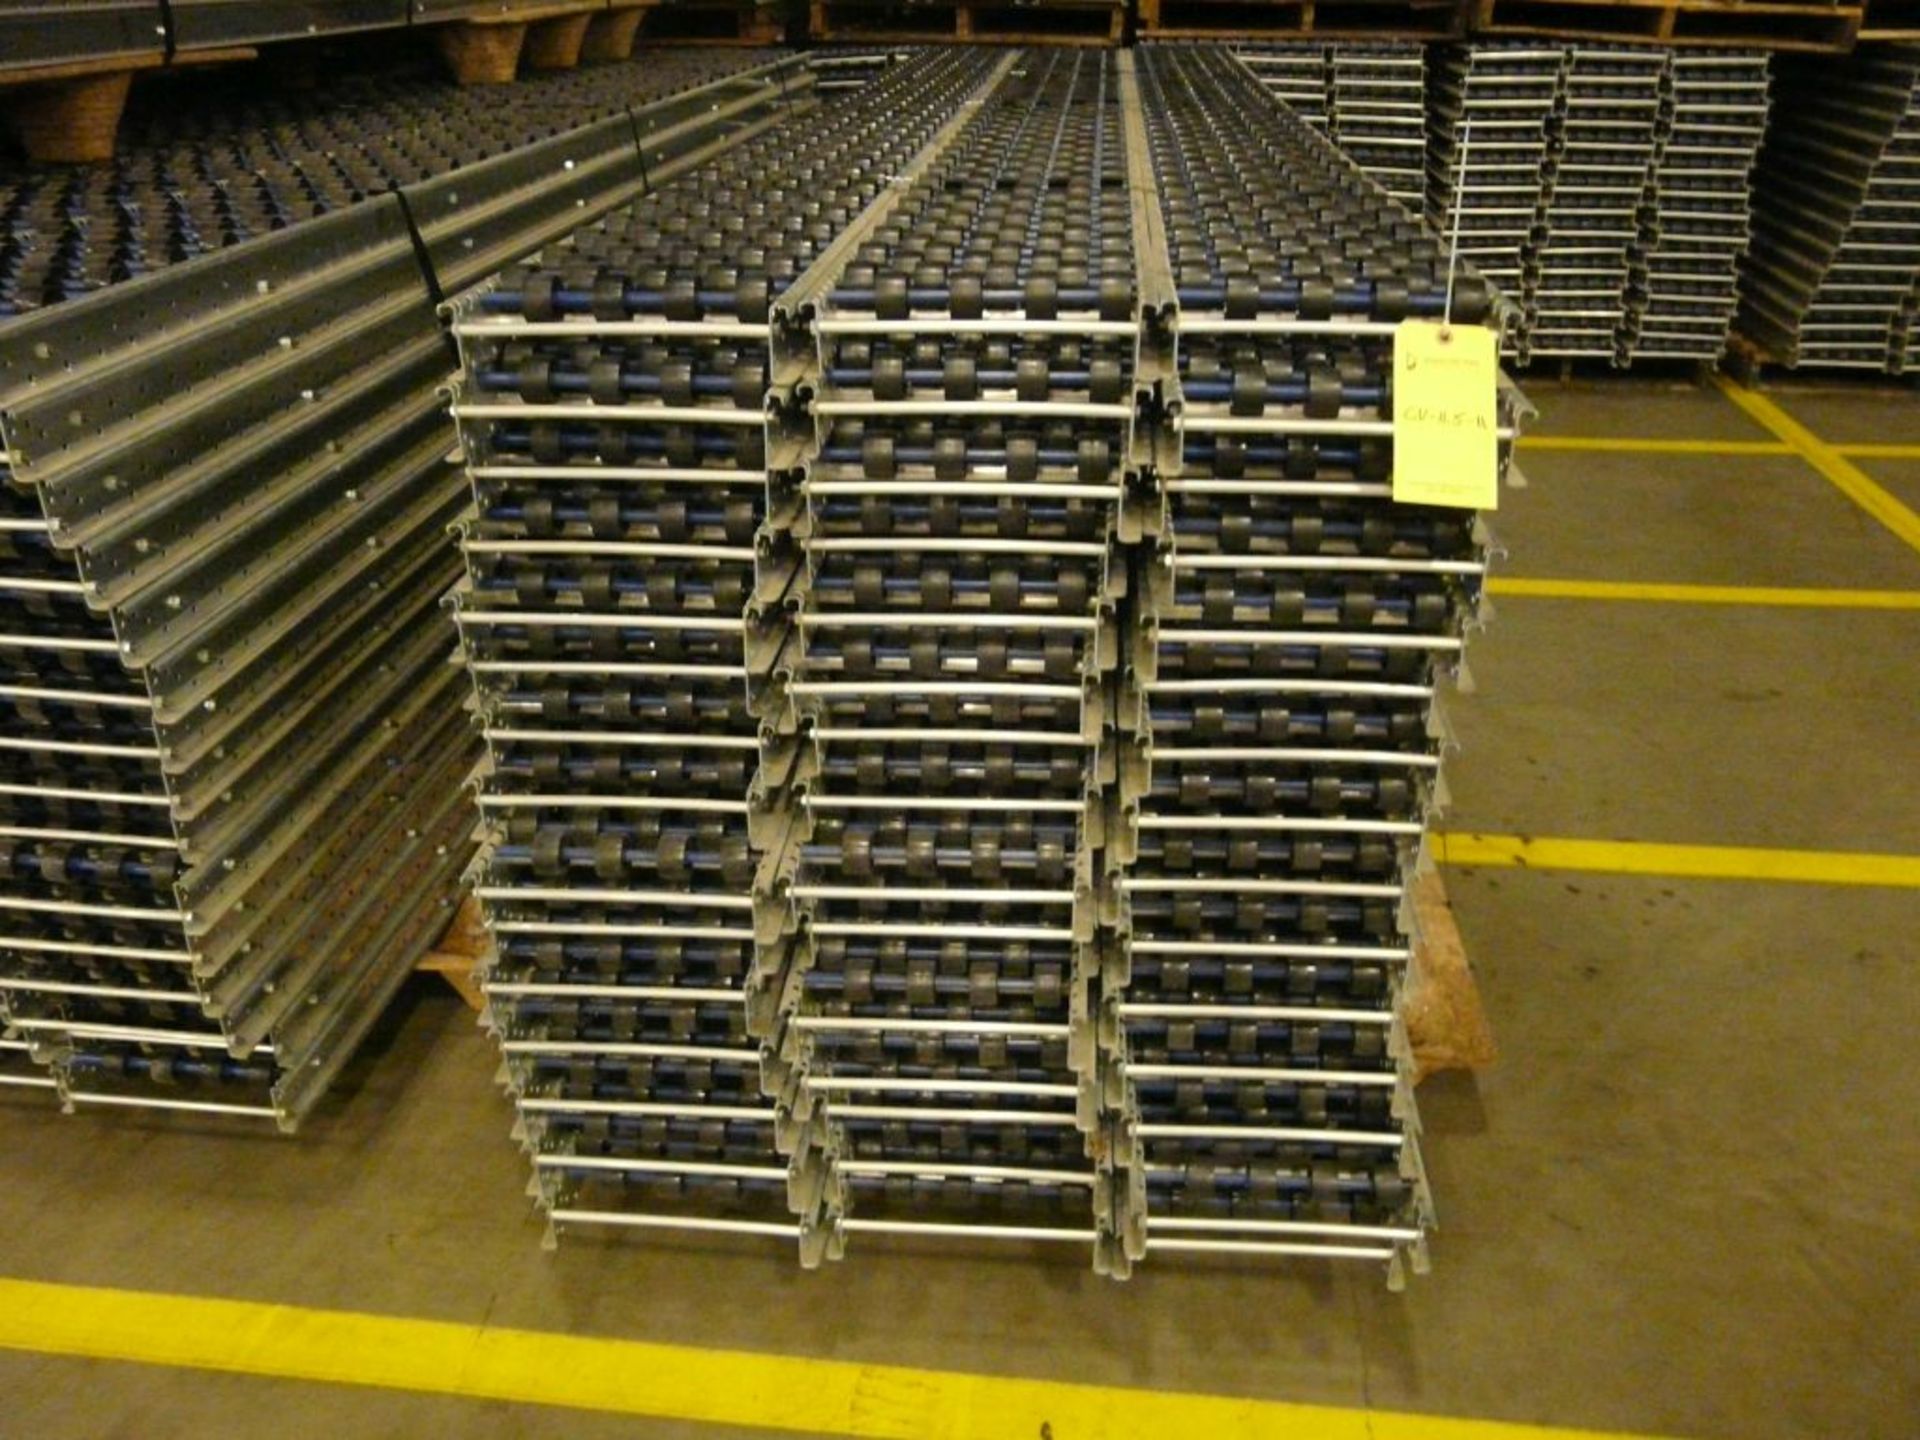 Lot of (90) SpanTrack Wheelbed Carton Flow Conveyors - 11.5'L x 11"W; Tag: 223596 - $30 Lot - Image 2 of 4